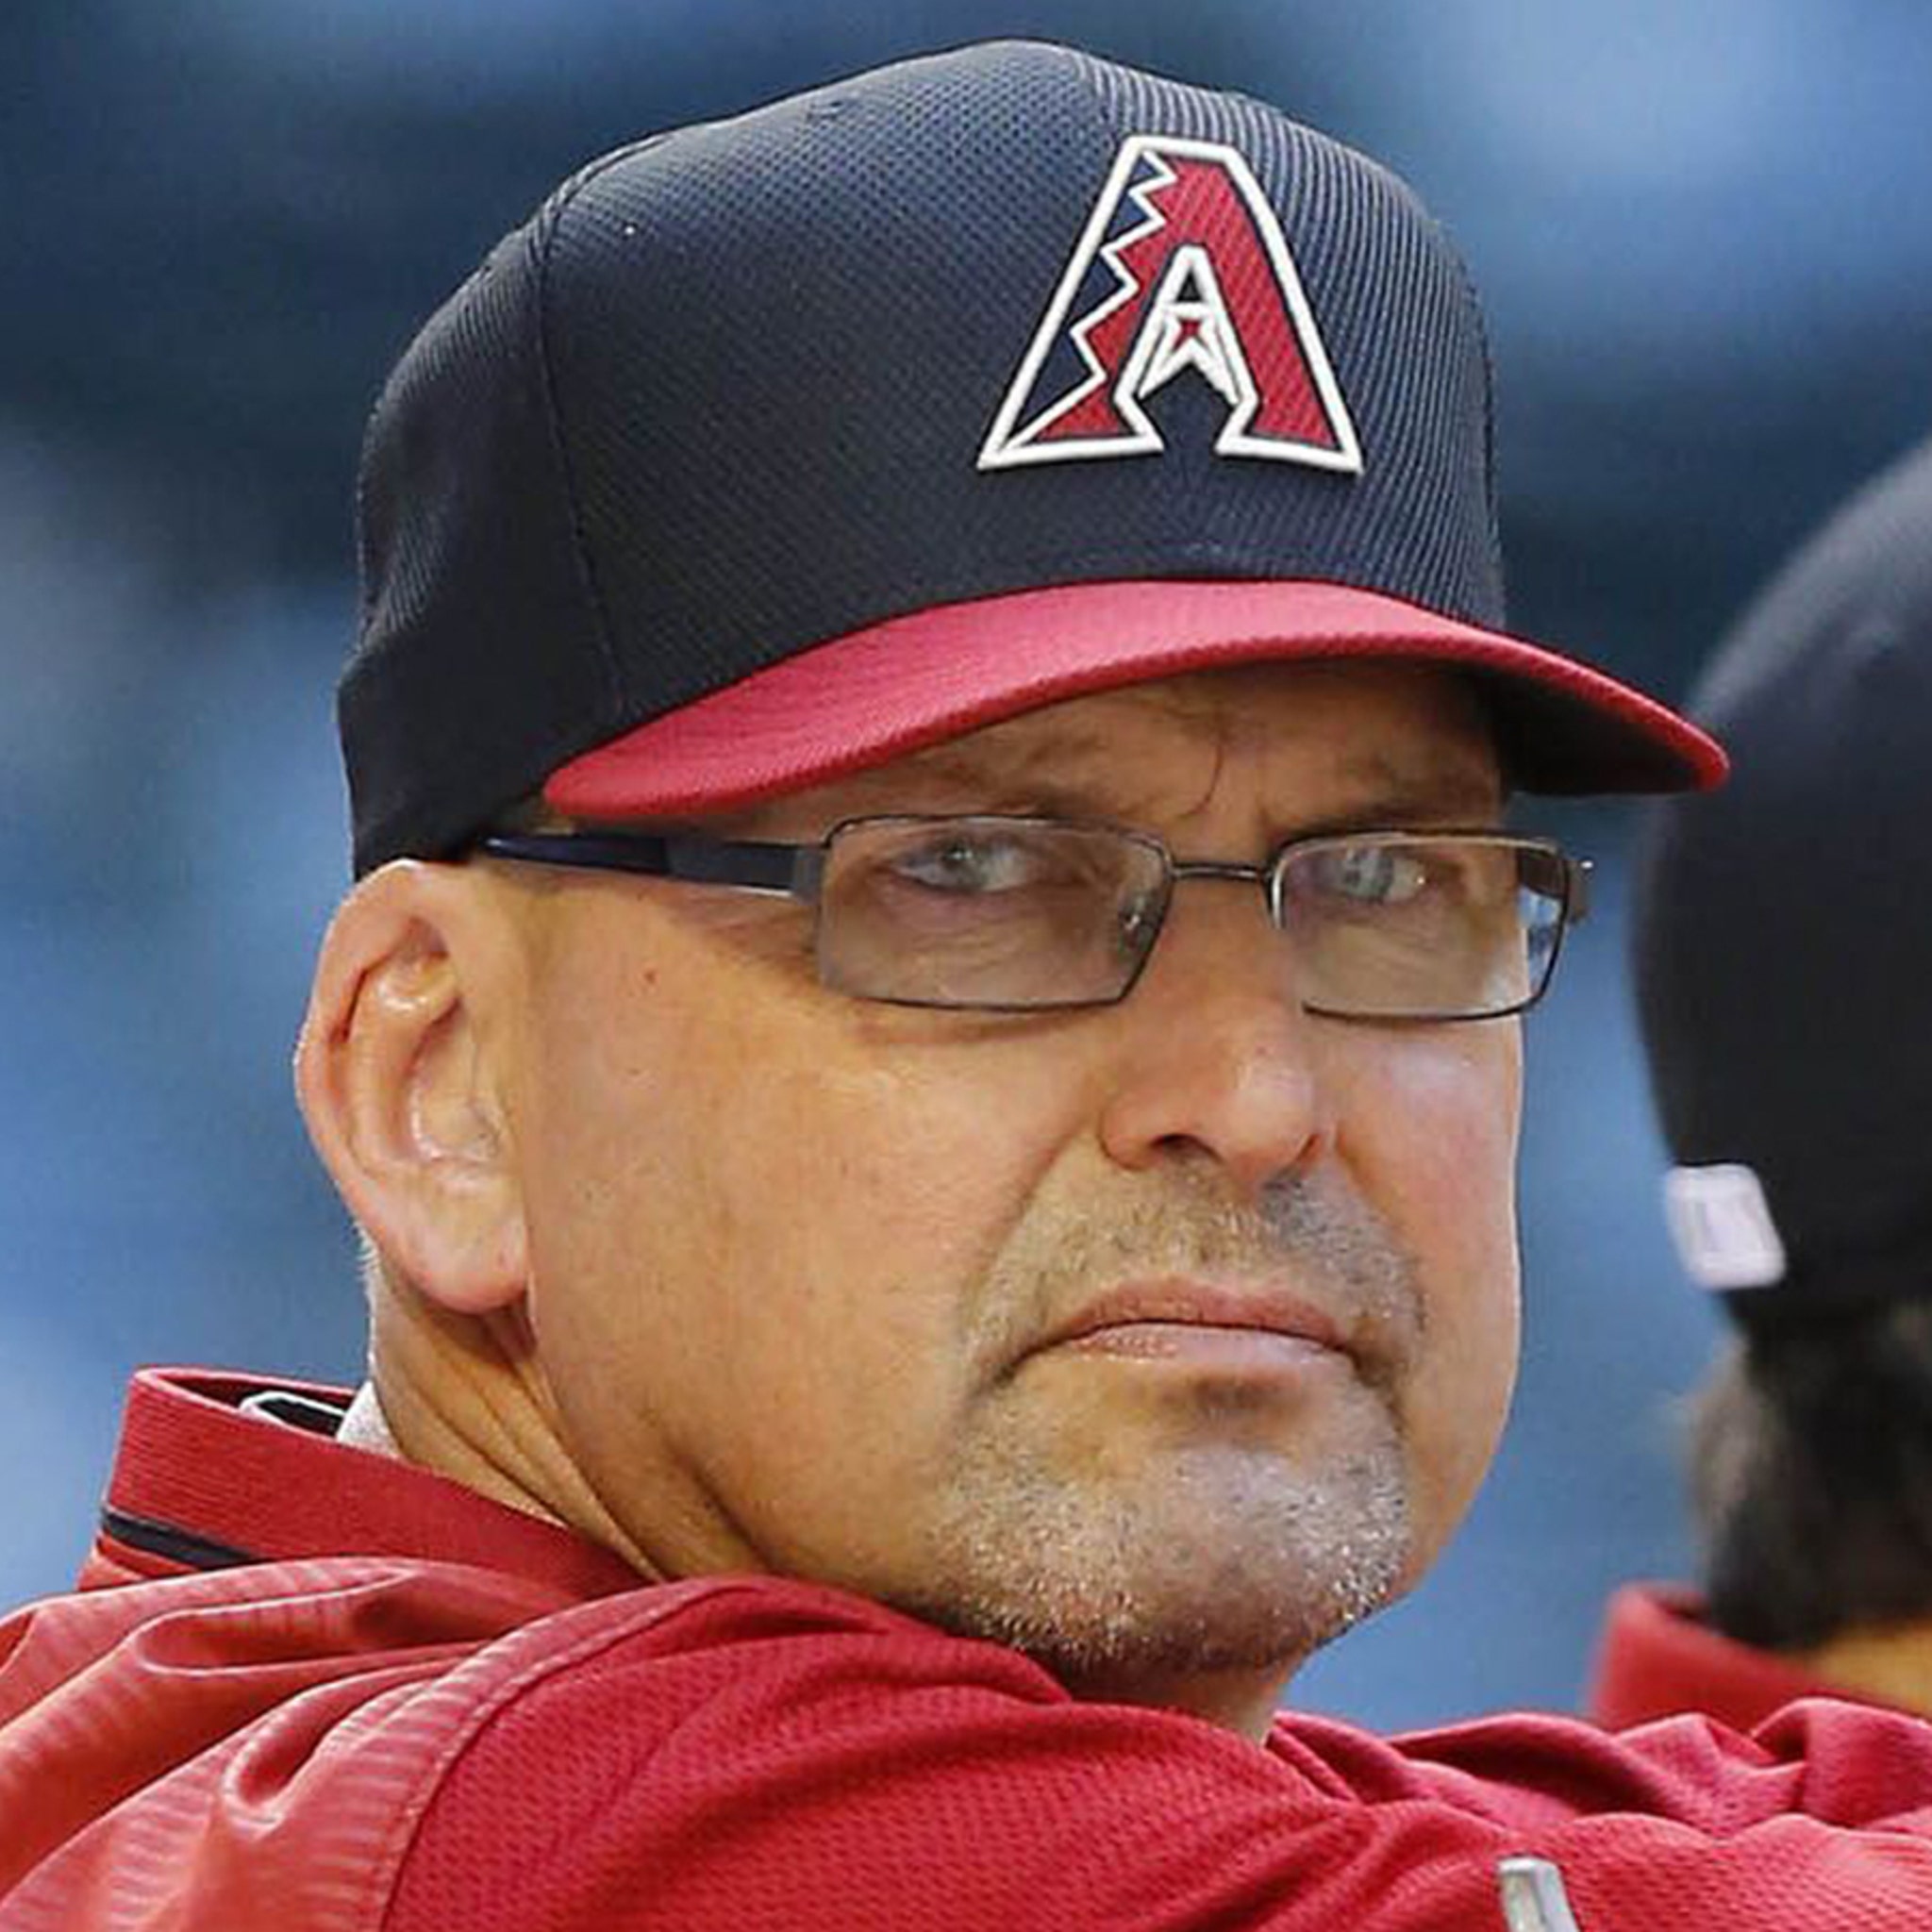 MLB's Mark Grace Apologizes For Calling Ex-Wife 'Dingbat' on Air